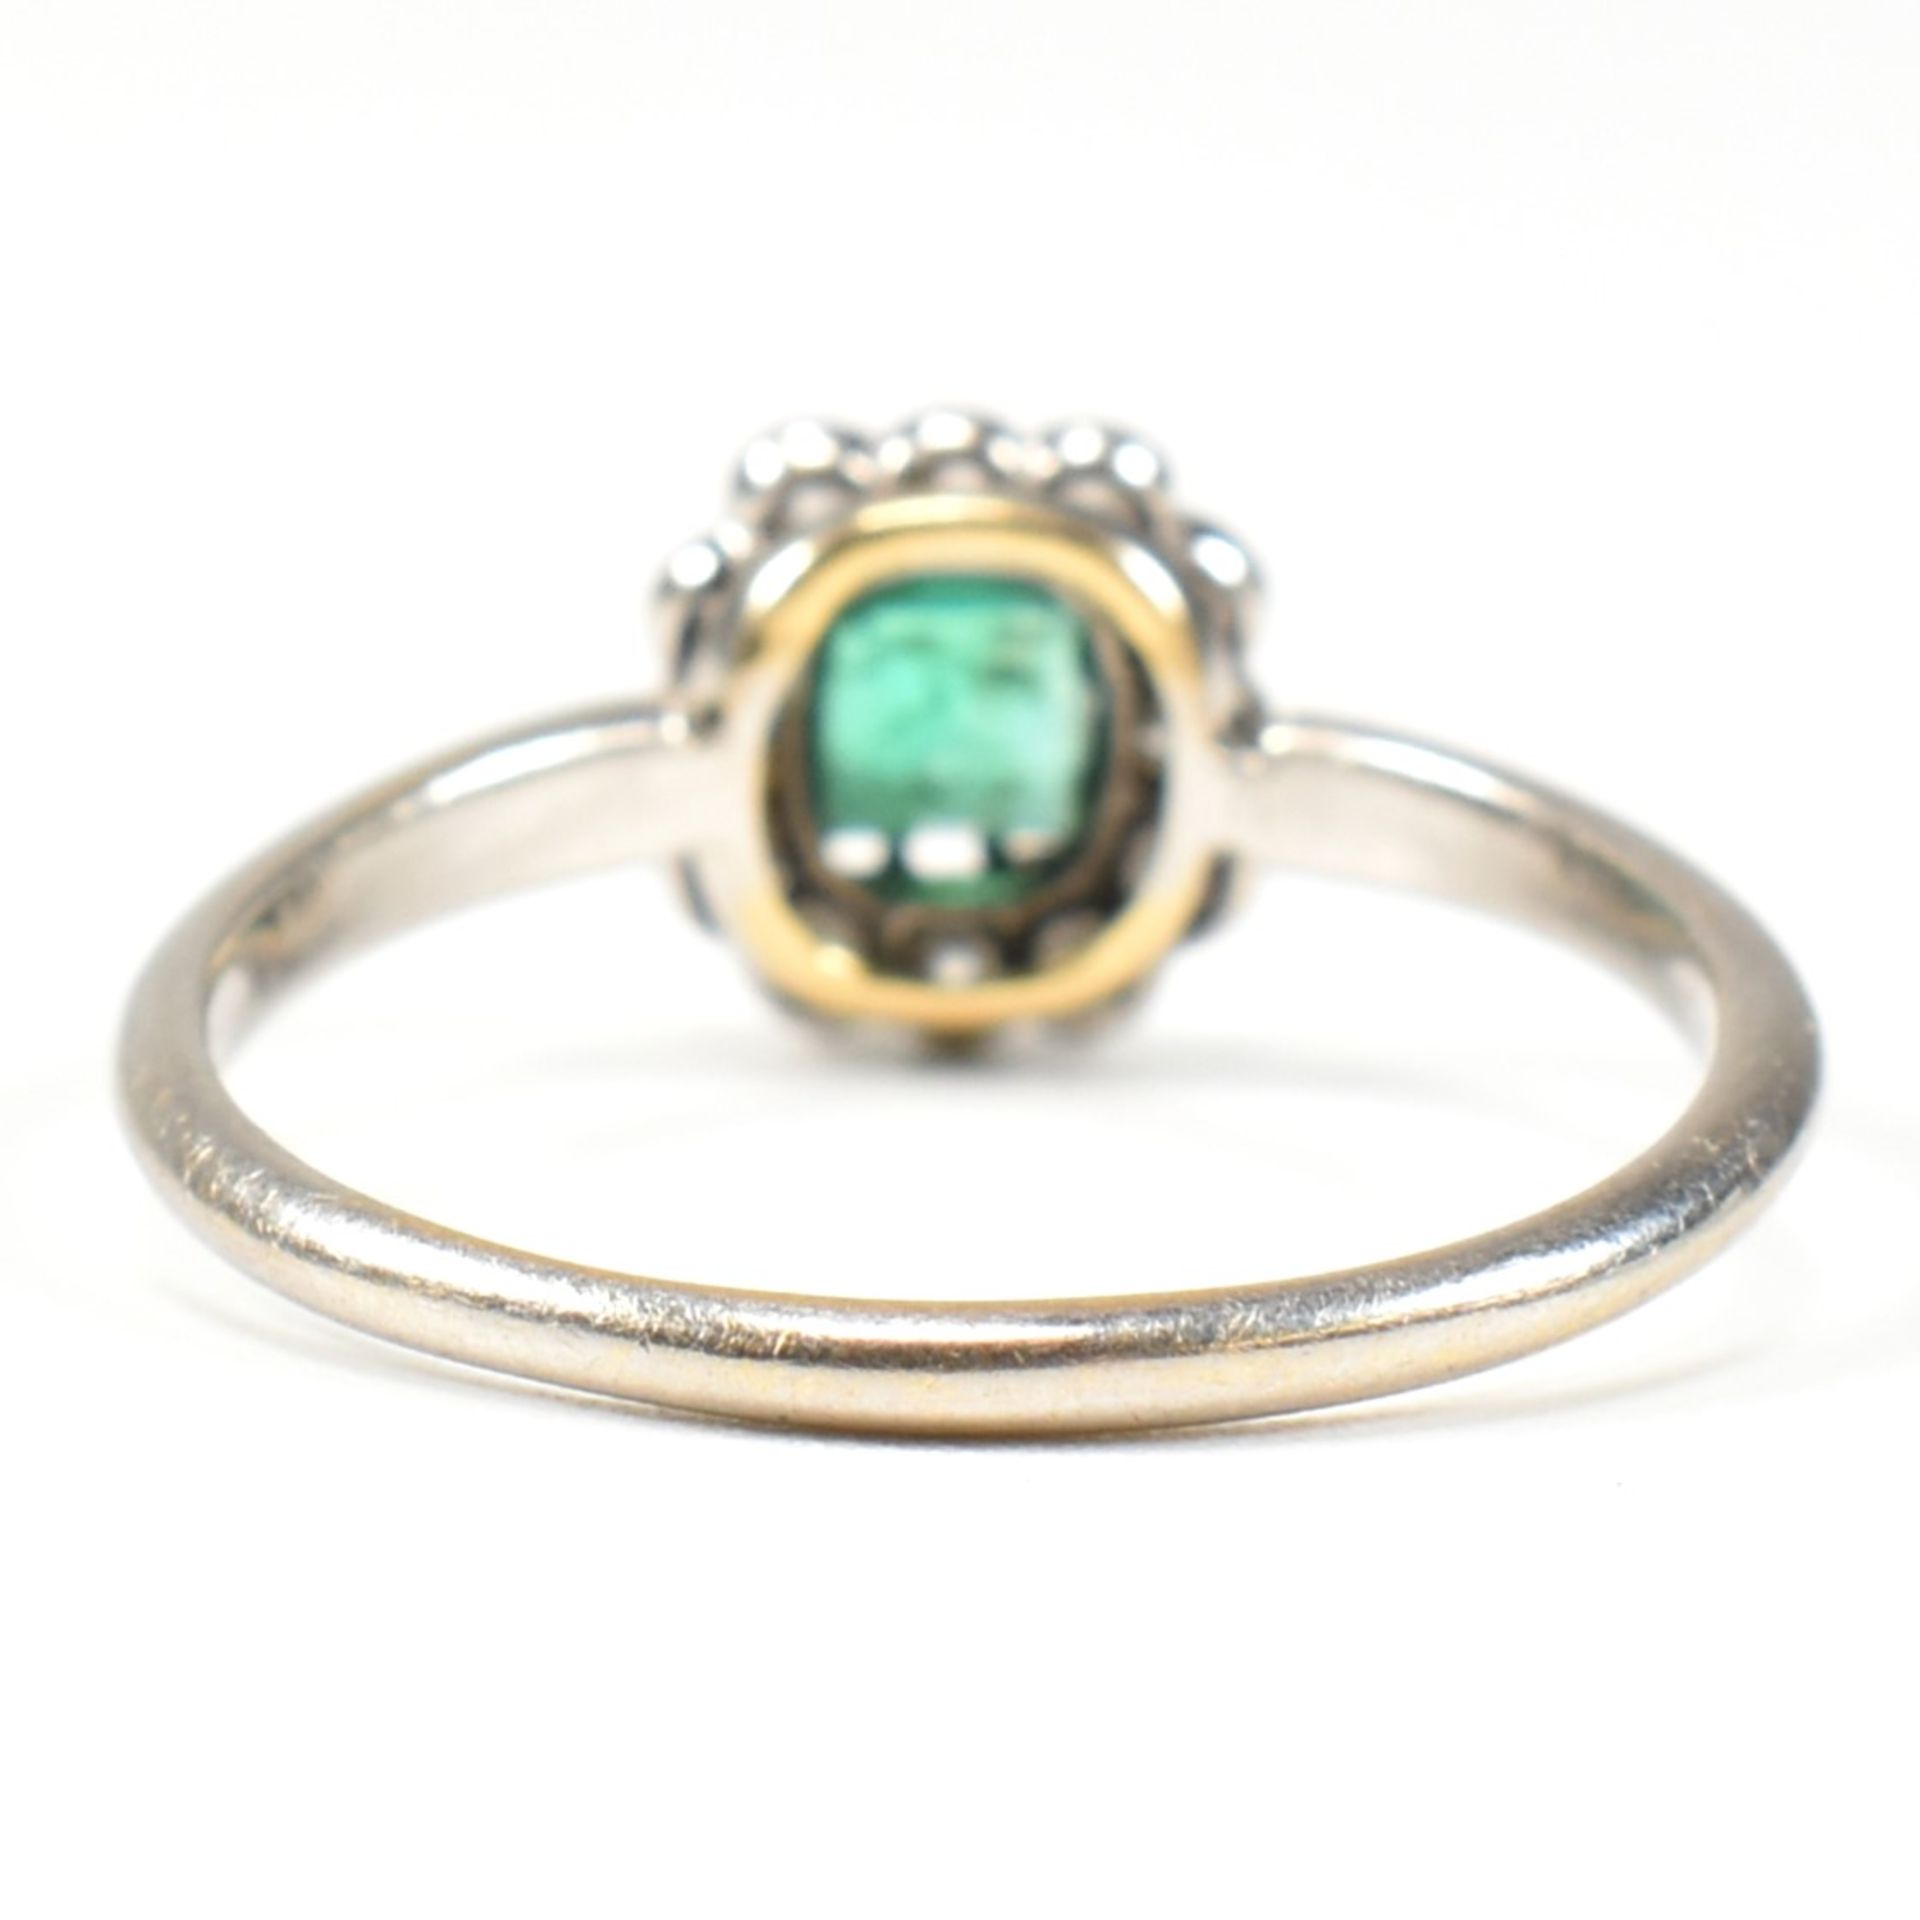 1920S 18CT WHITE GOLD EMERALD & DIAMOND CLUSTER RING - Image 3 of 9